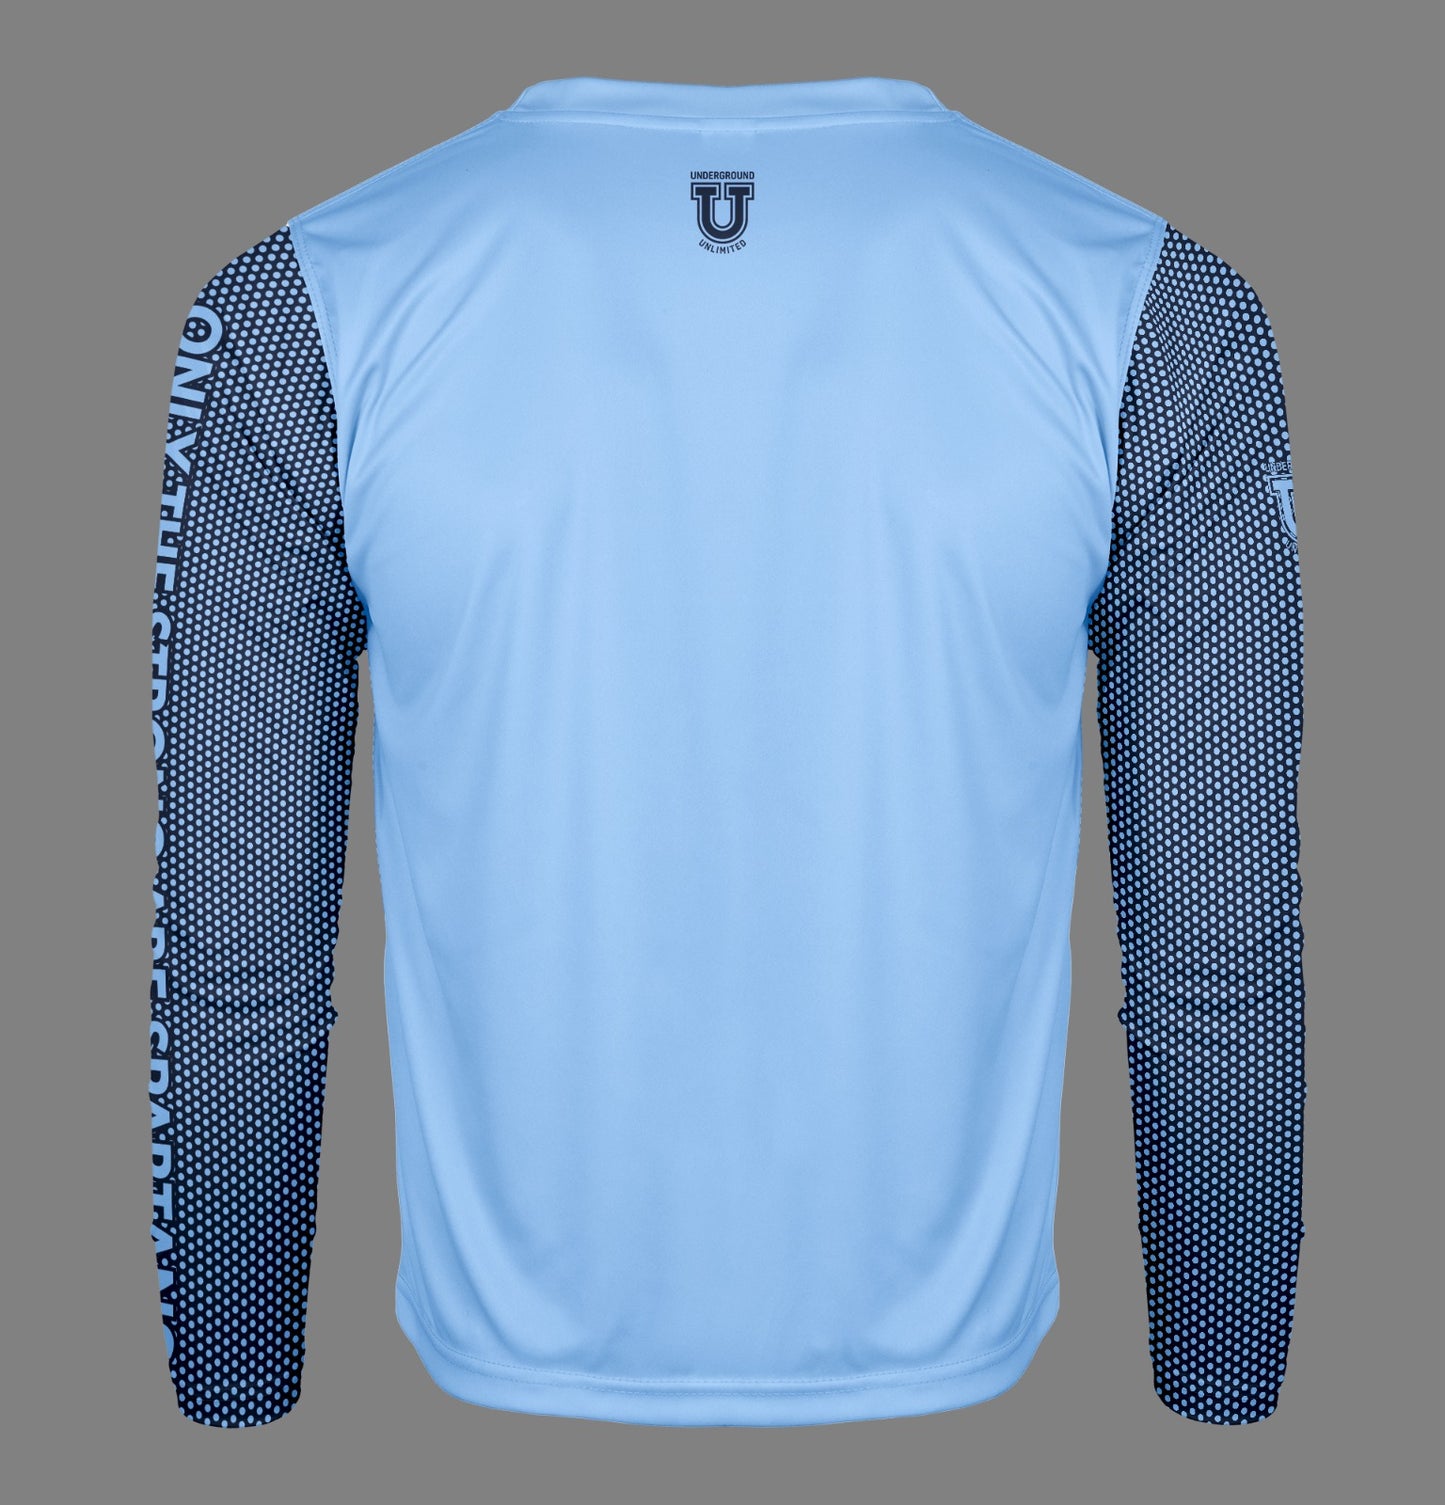 W.T. Chipman Pro Performance Sun Long Sleeve ~ Columbia Navy Dot "Only the Strong are Spartans"